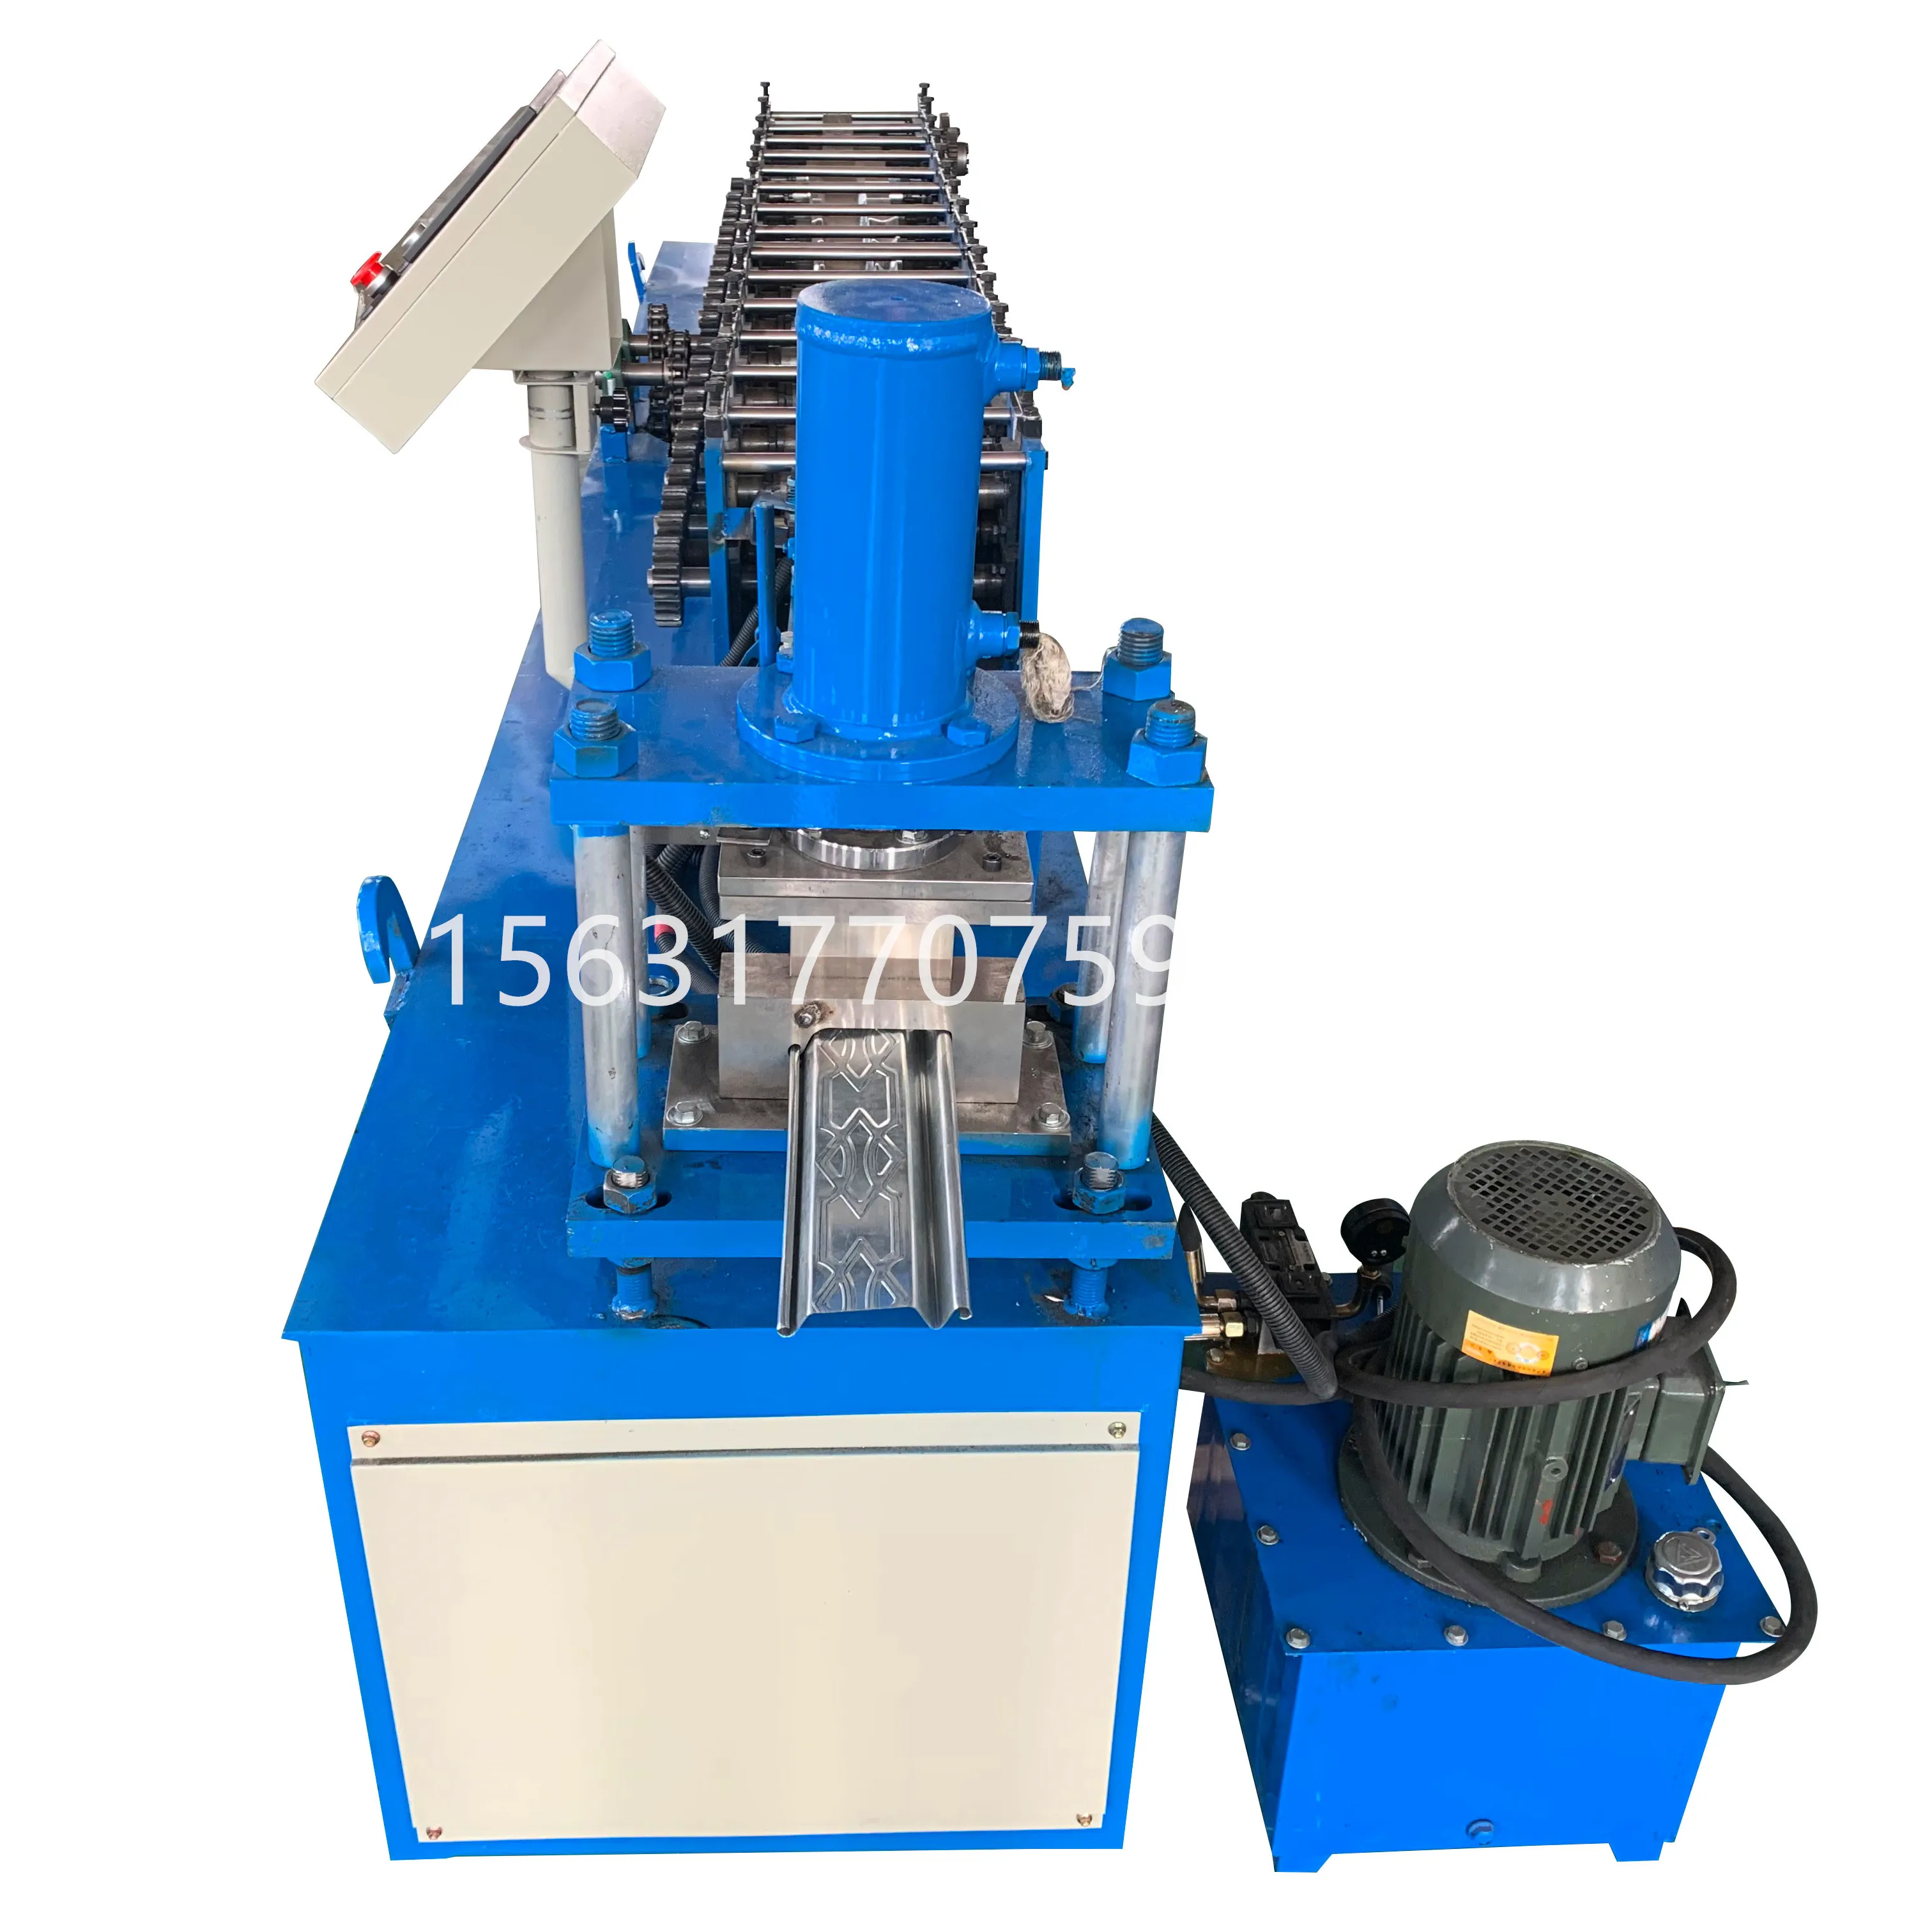 production equipment for rolling shutter doors Fully automatic Galvanized Steel rolling shutter machines